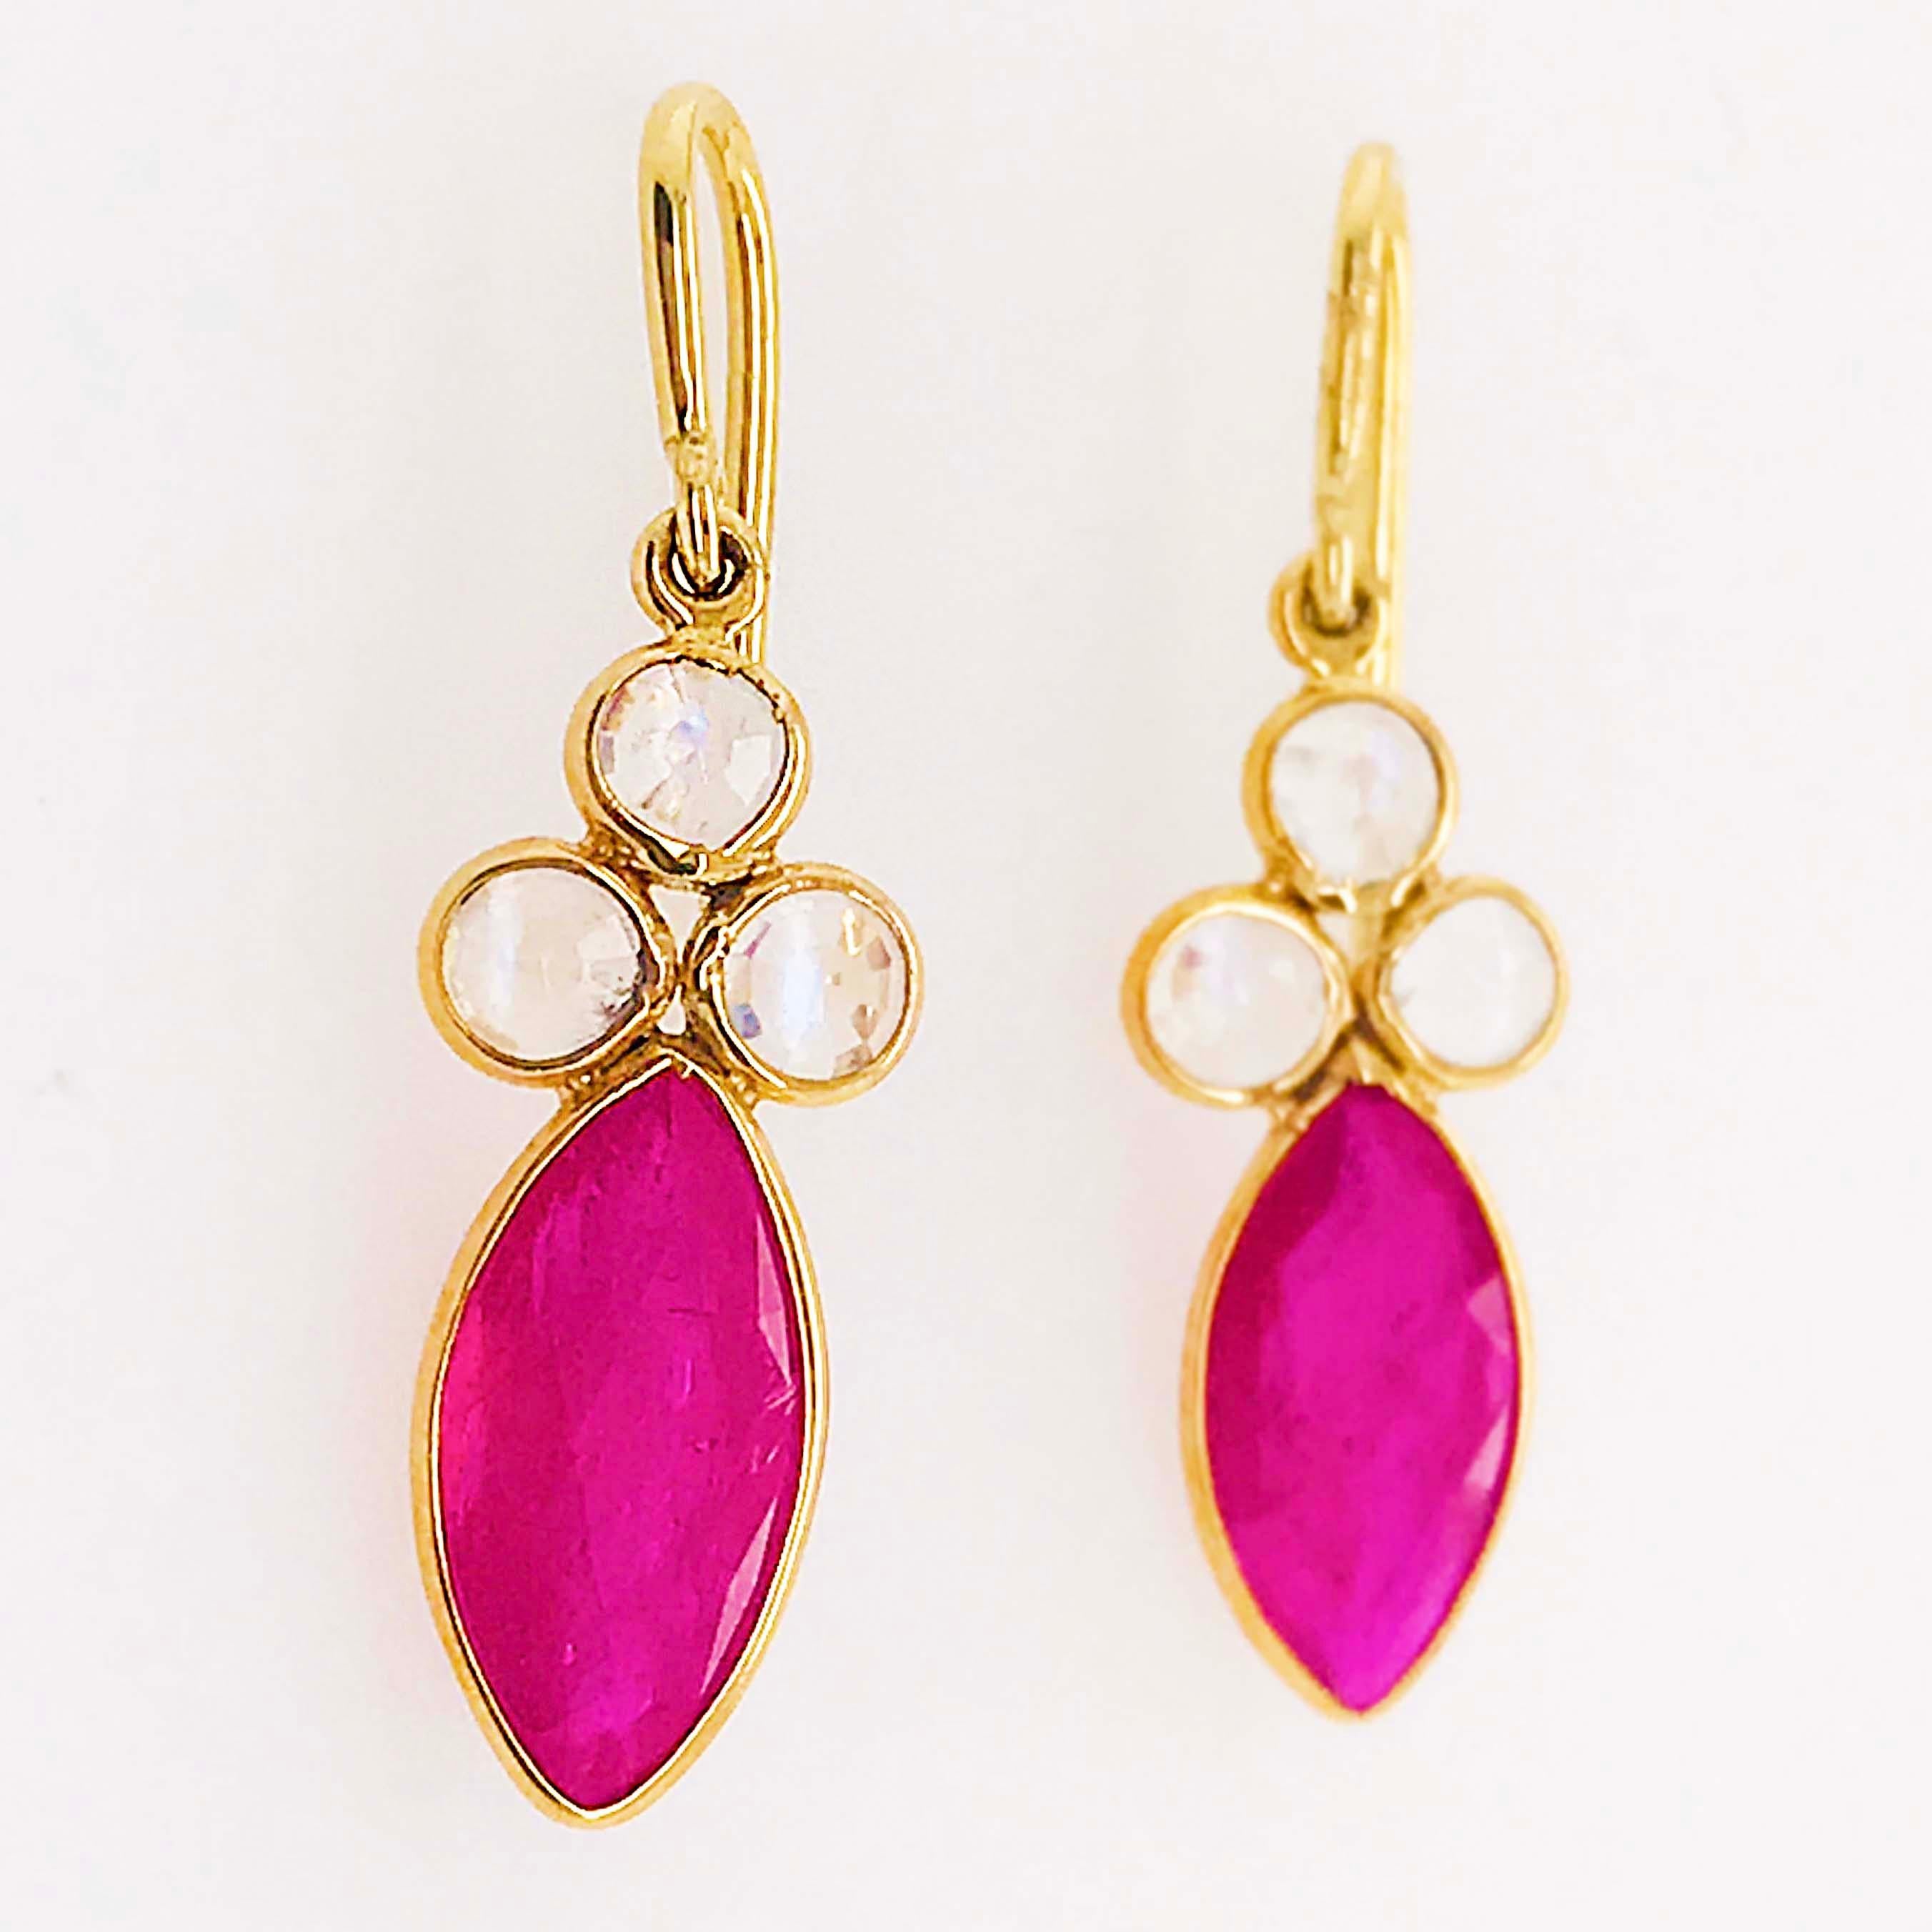 Bold & Beautiful, natural ruby and genuine rainbow moonstone designer earrings! These Tresor original designer earrings are vibrant and striking. The earrings have a marquise shaped, bright ruby gemstone set in a rich 18 karat yellow gold bezel. The